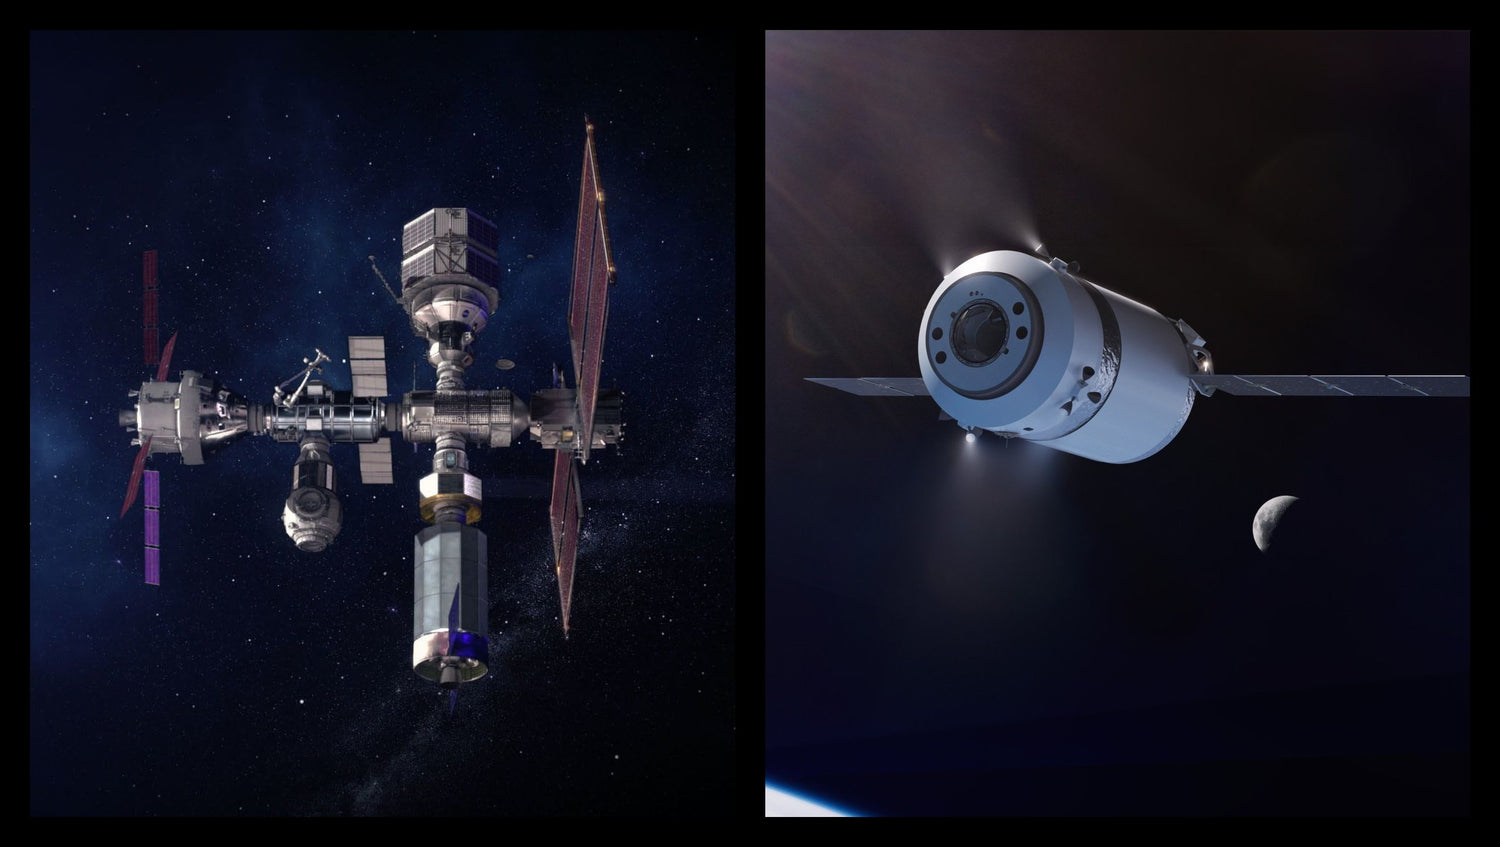 NASA will build a Gateway Station orbiting the Moon, SpaceX will develop a custom Dragon to deliver cargo